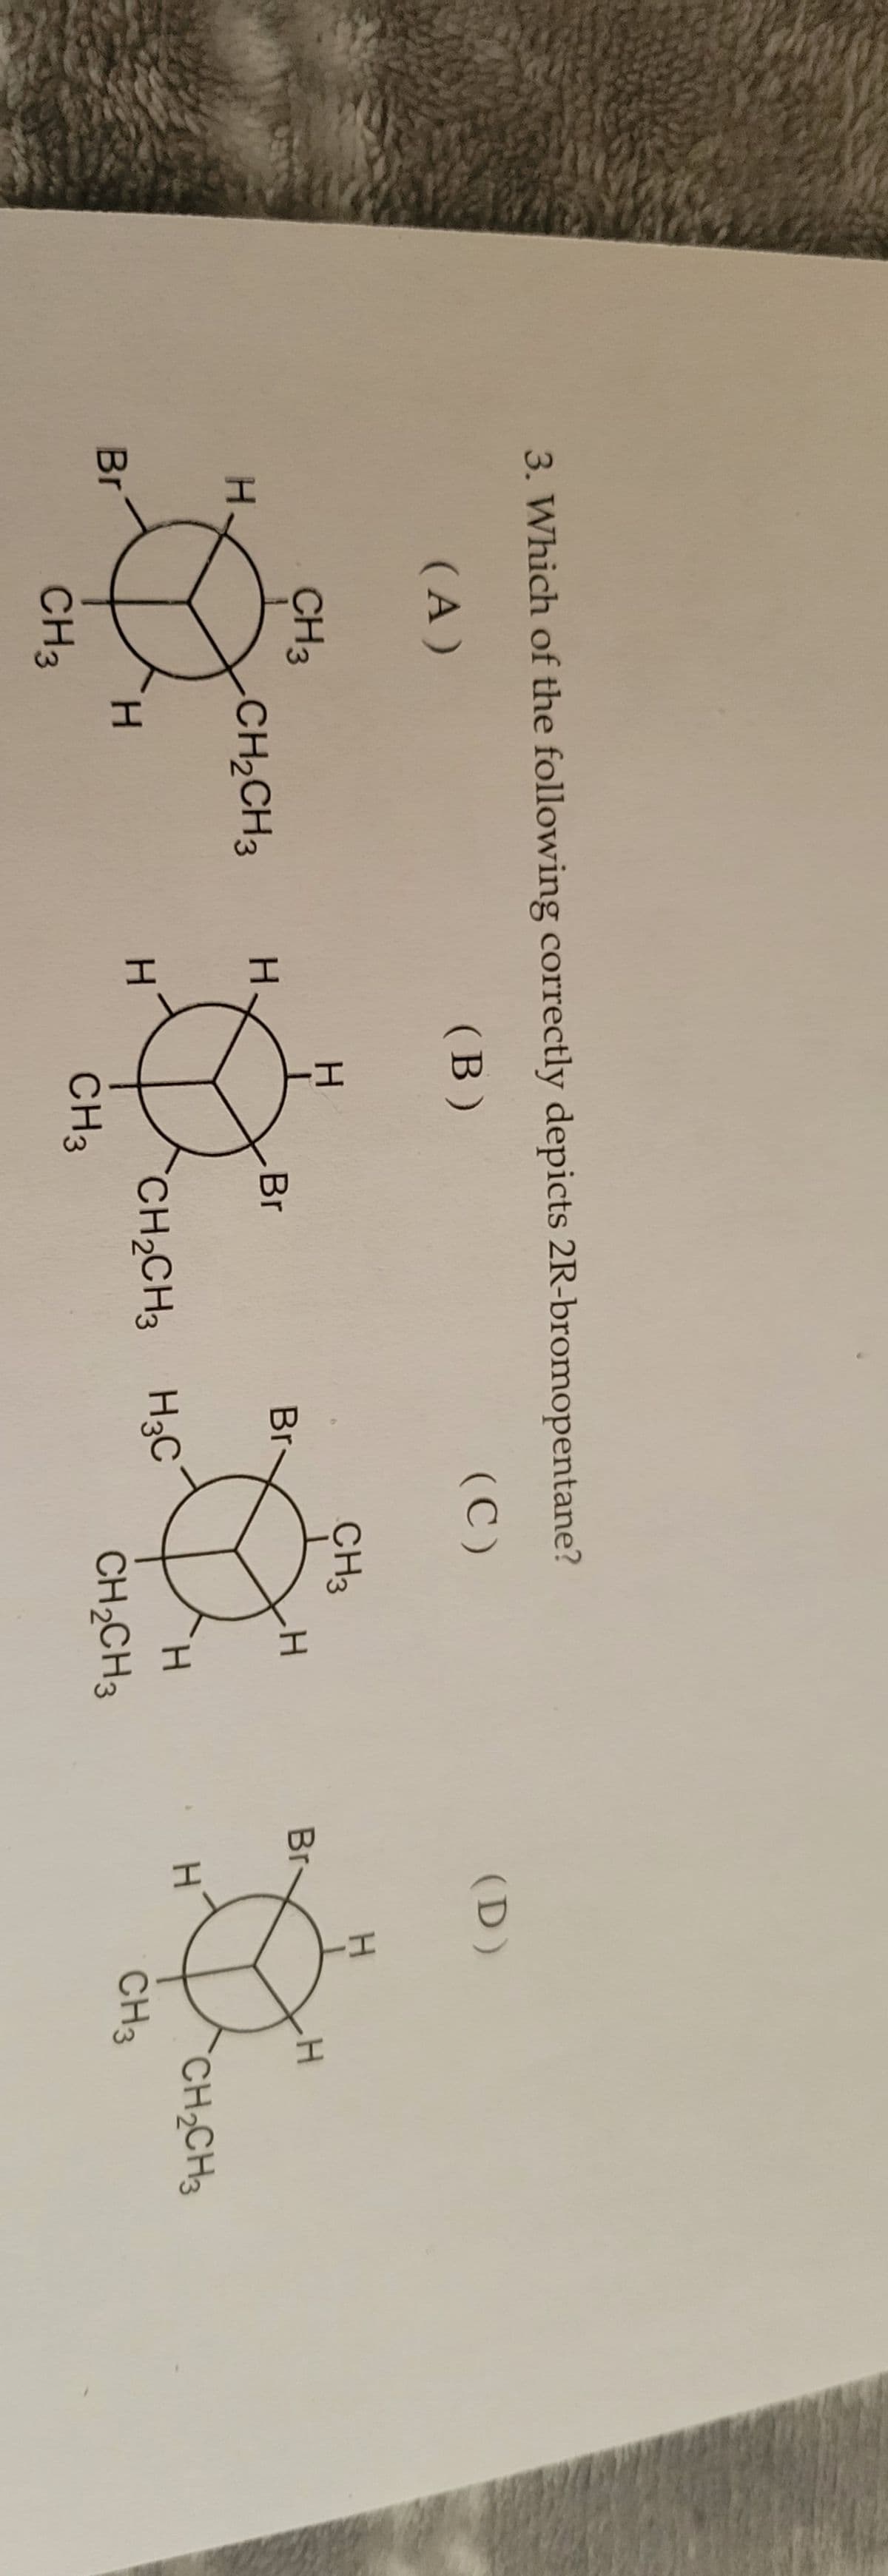 3. Which of the following correctly depicts 2R-bromopentane?
(A)
(B)
H
Br
CH 3
CH3
CH₂CH3
H
H
H
CH3
Br
Br-
CH₂CH3 H3C
(C)
CH3
H
H
CH₂CH3
(D)
Br-
H
H
H
CH3
CH₂CH3